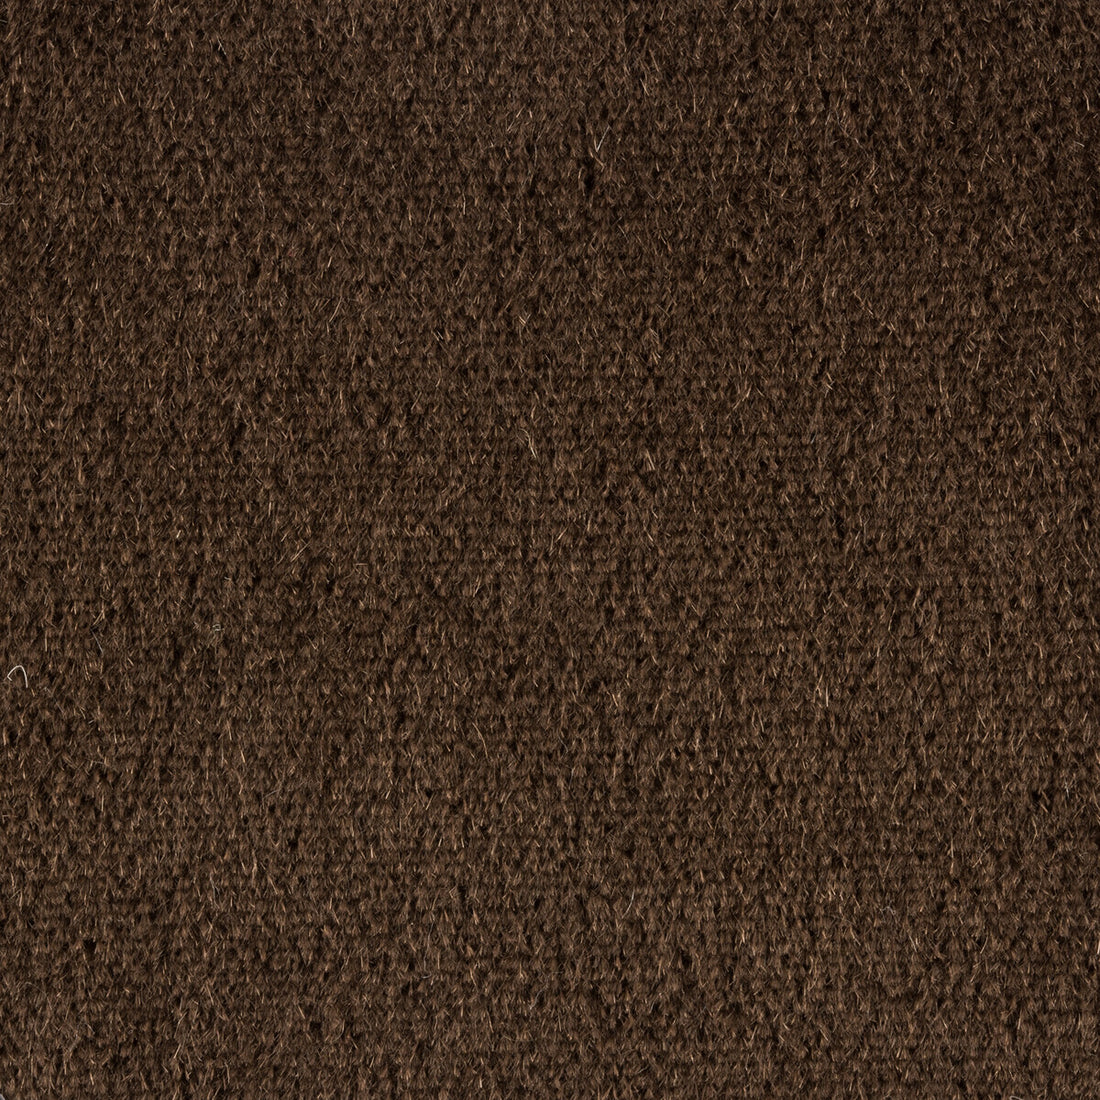 Autun Mohair Velvet fabric in grizzli color - pattern BR-89778.871.0 - by Brunschwig &amp; Fils